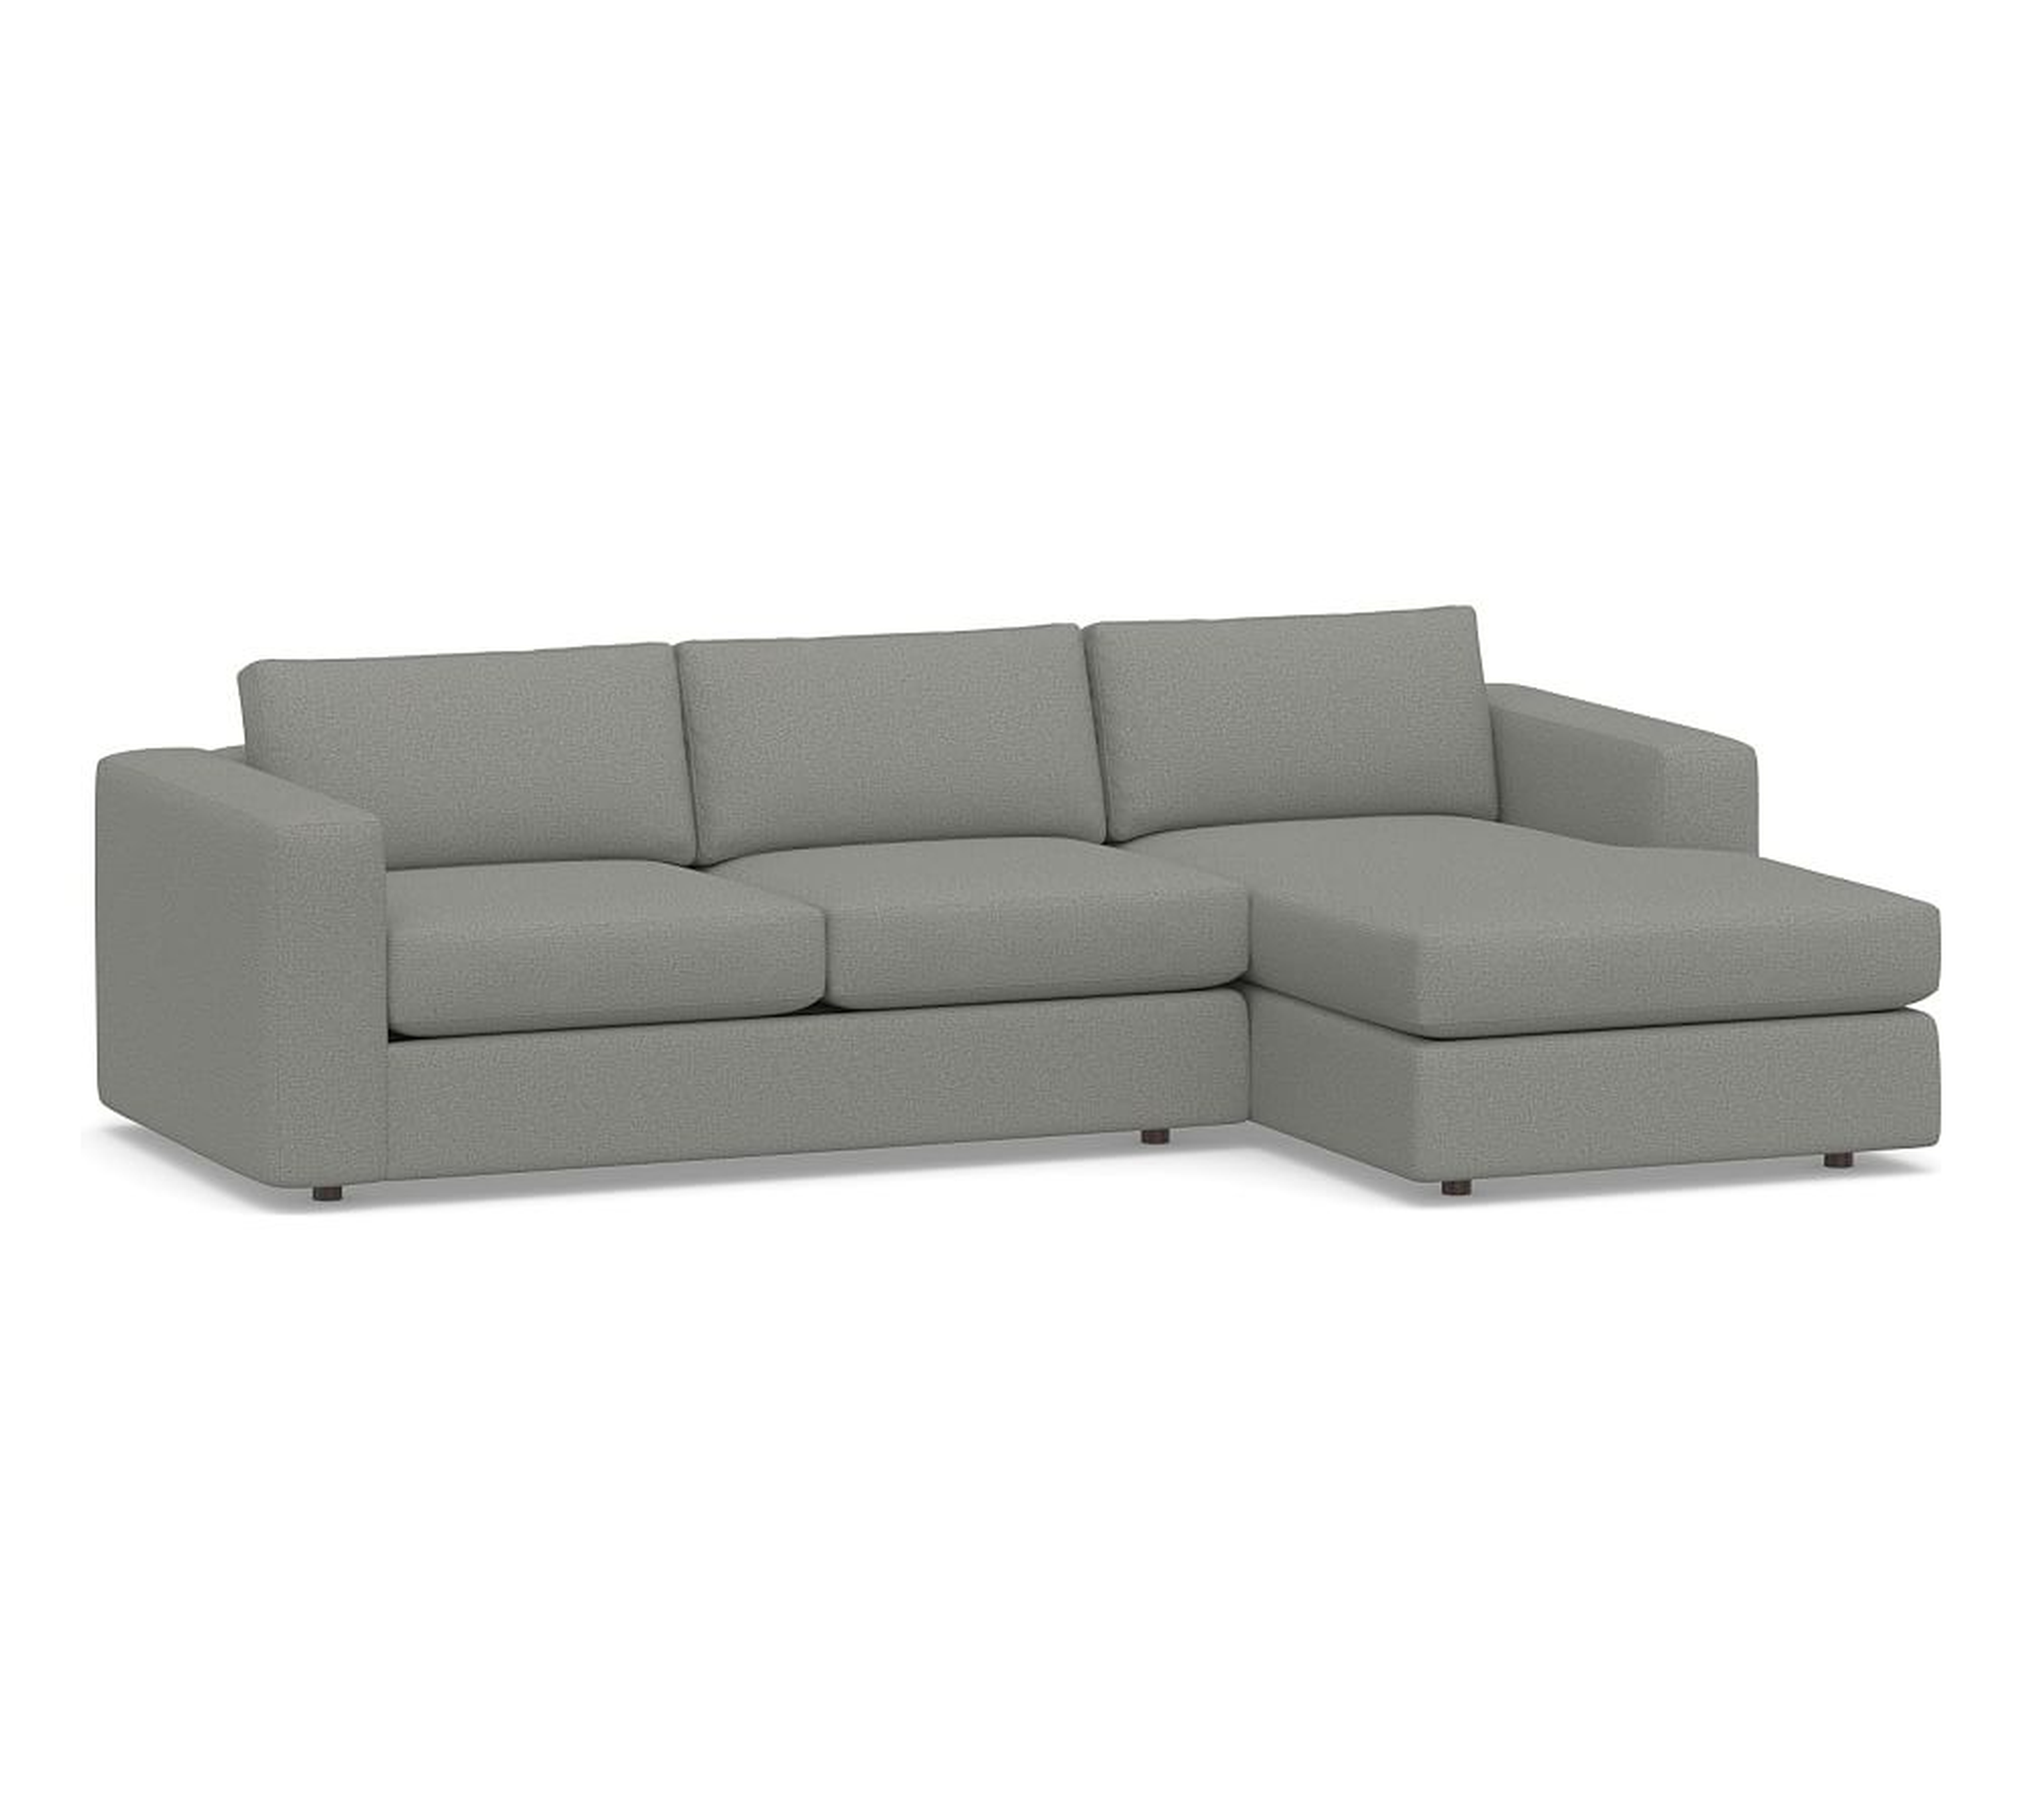 Carmel Square Arm Upholstered Left Arm Loveseat with Chaise Sectional, Down Blend Wrapped Cushions, Heathered Chenille Charcoal - Pottery Barn